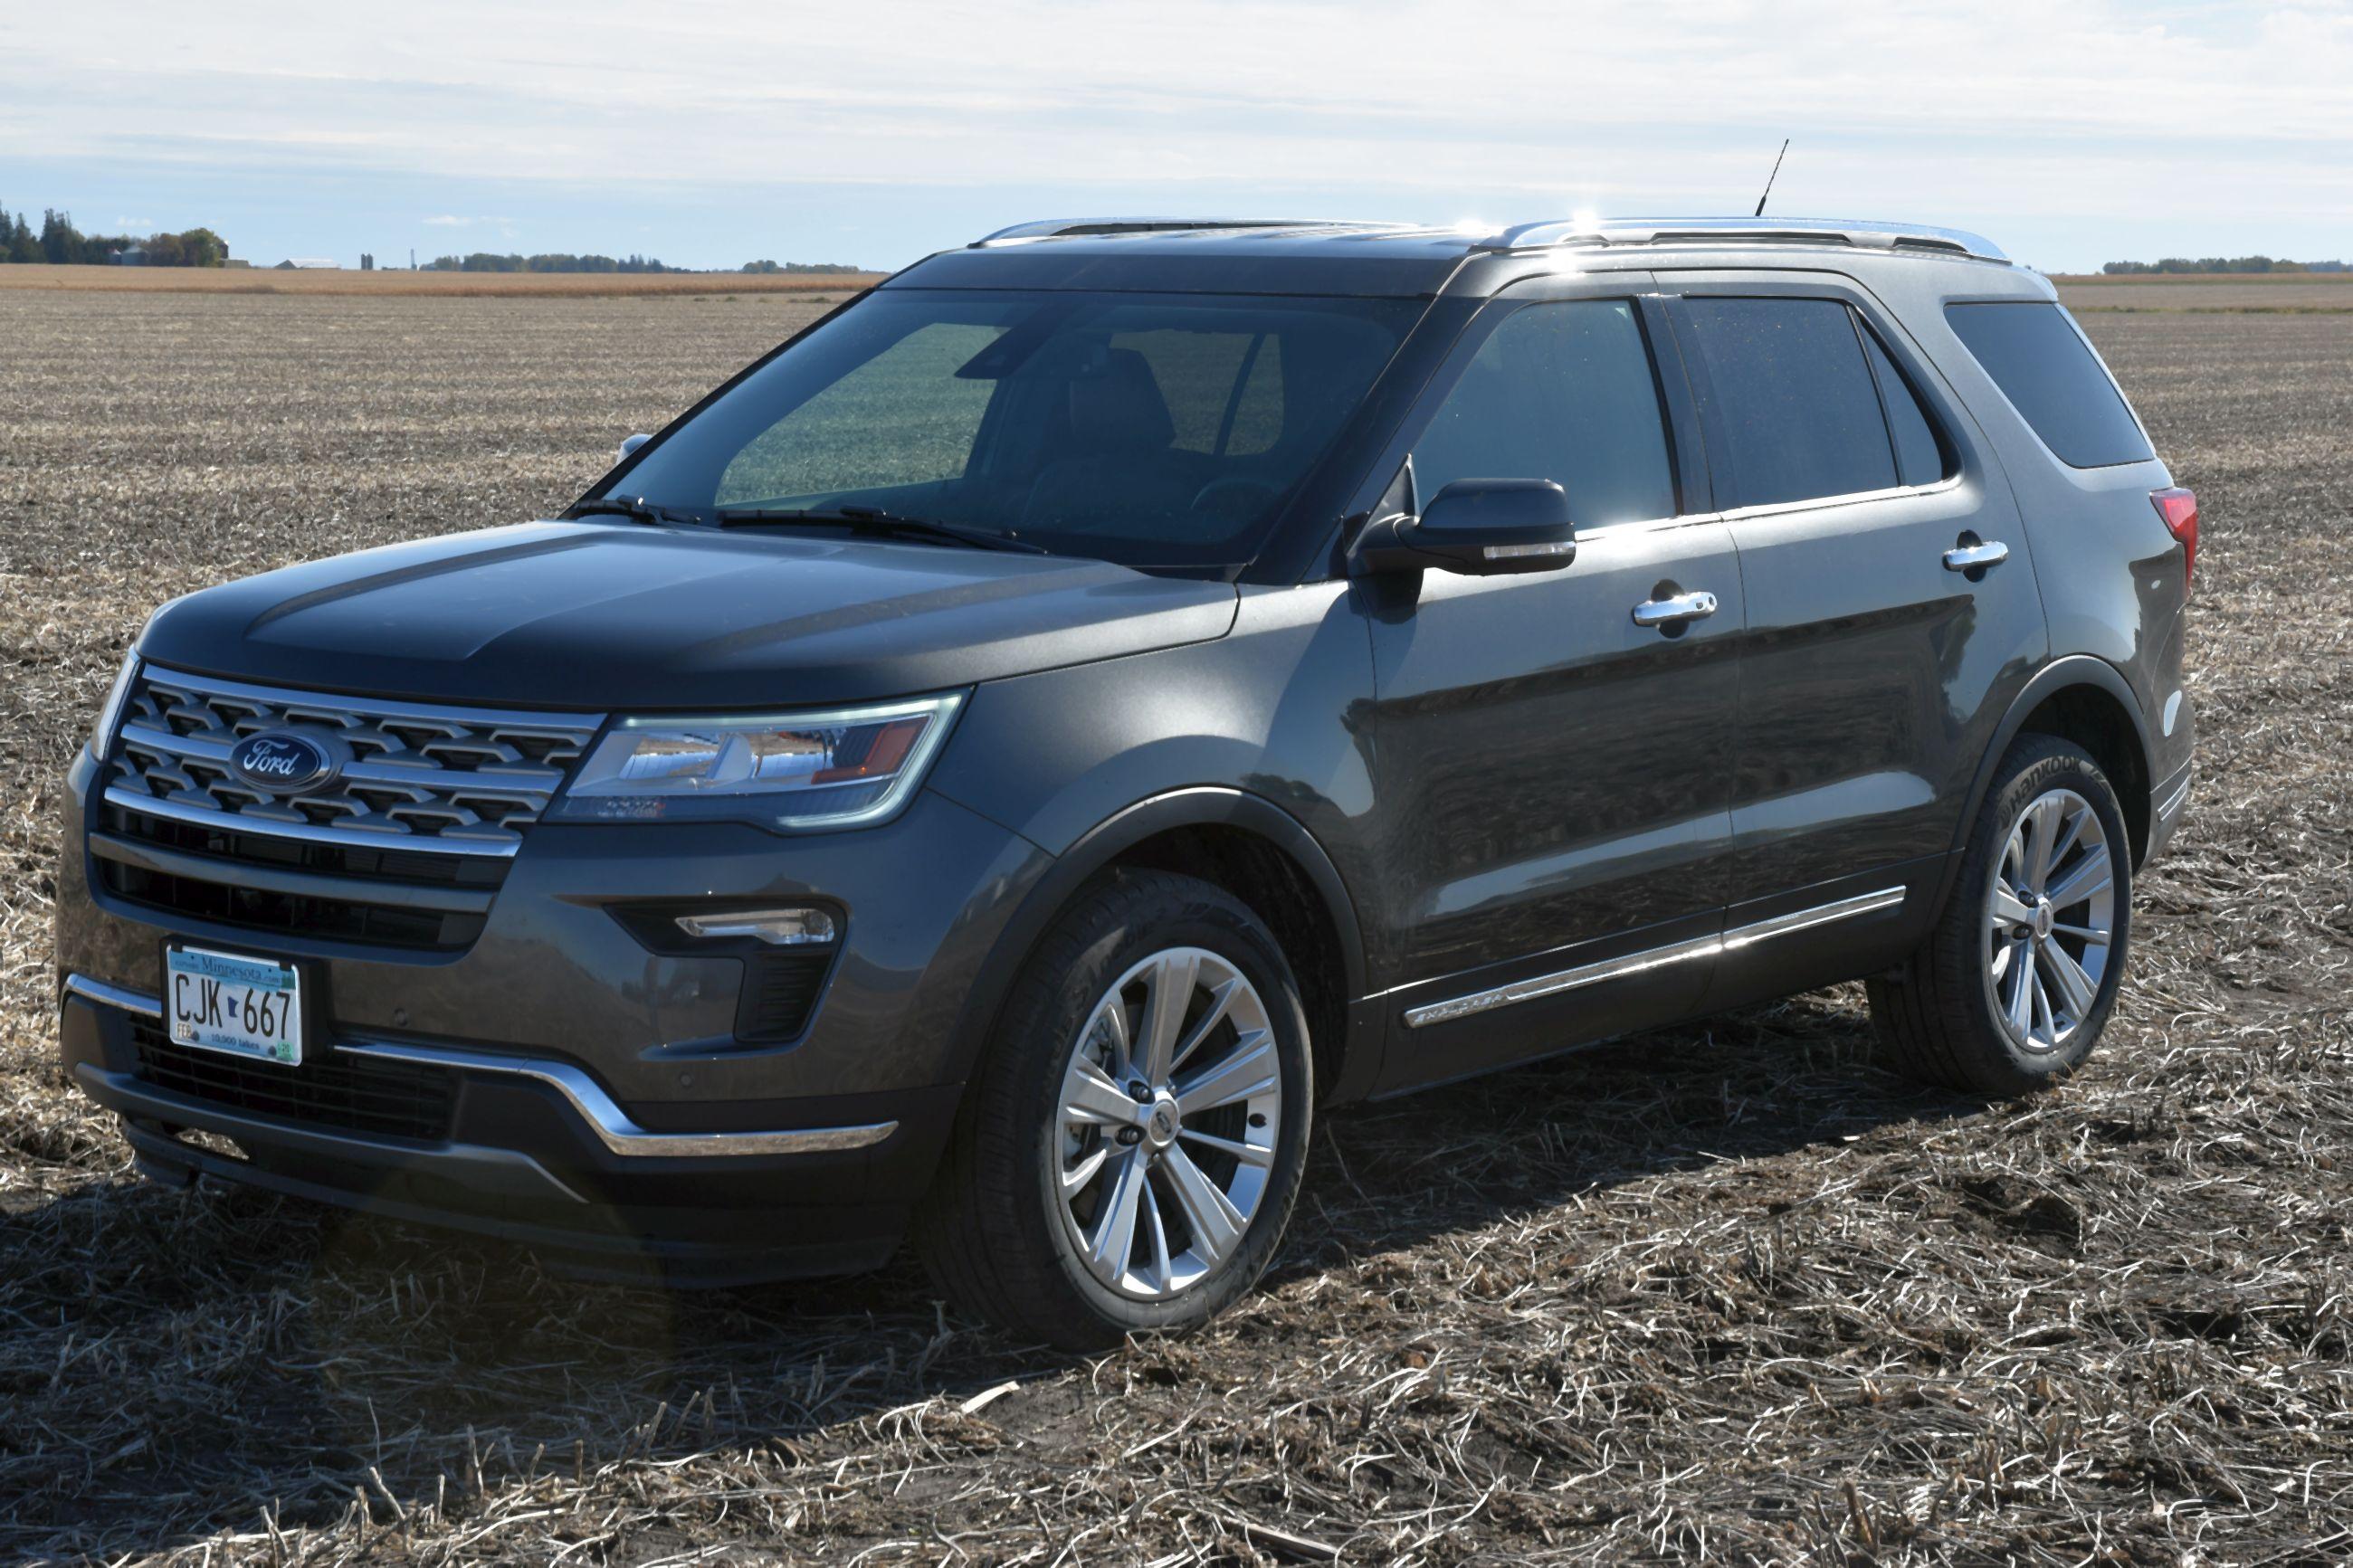 2019 Ford Explorer Limited, 4x4, Navigation, Leather, 4 Door, 3.5 Liter, Auto Loaded, 11,331 Miles,